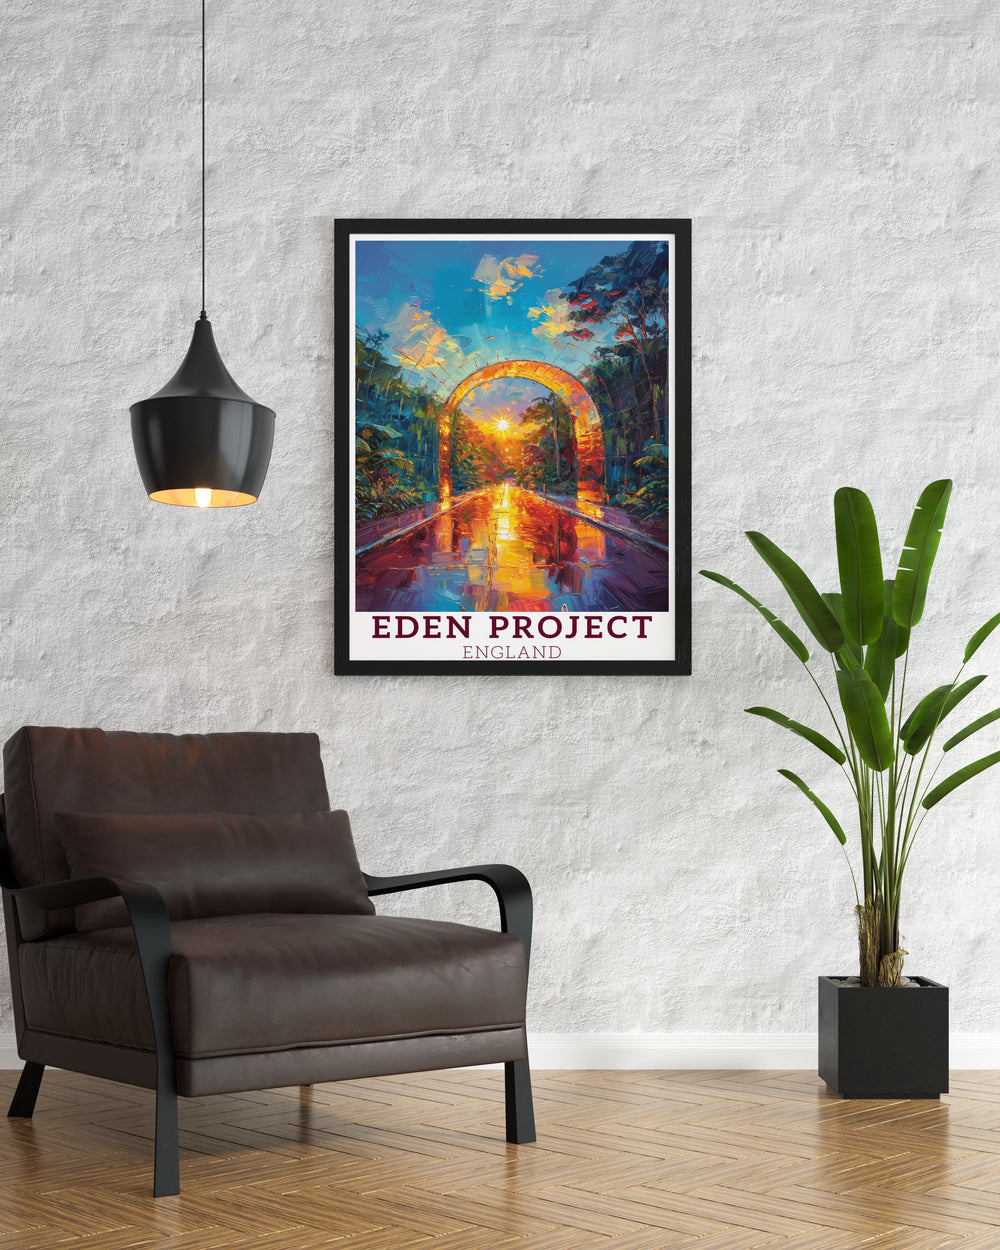 Eden Project travel poster showcasing the vibrant flora and architectural marvels of this famous Cornwall attraction a stunning piece for your living room or office adding a touch of elegance and environmental beauty to any space.